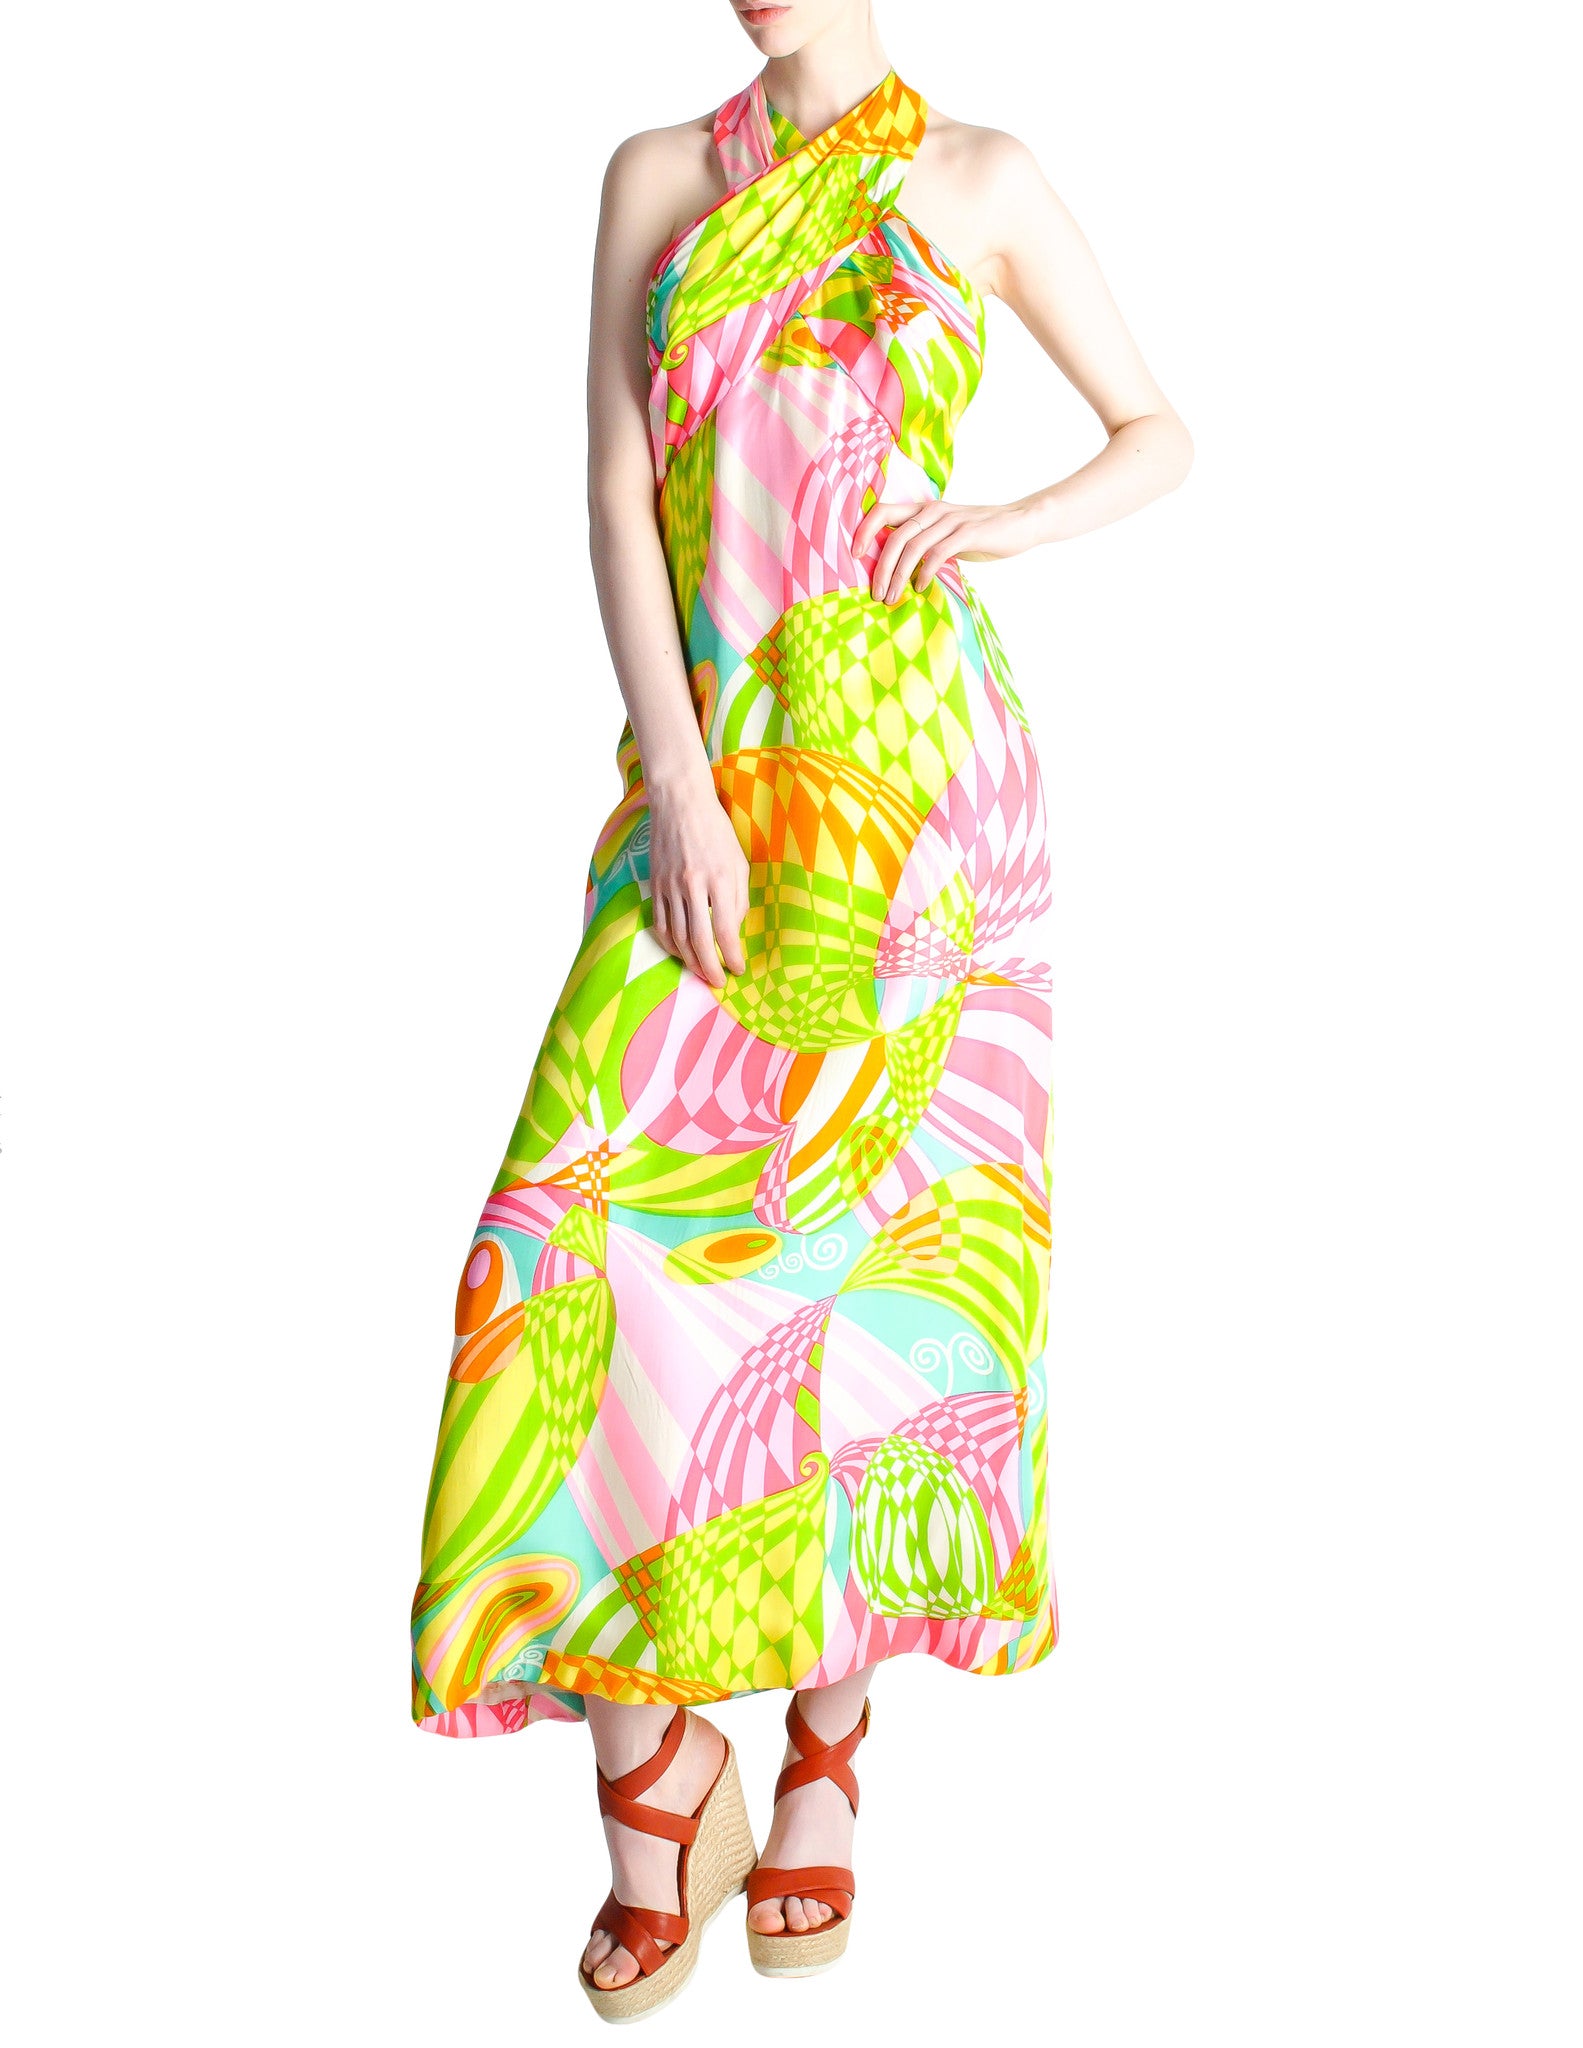 Malcolm Starr Vintage Colorful Psychedelic Op Art Maxi Dress